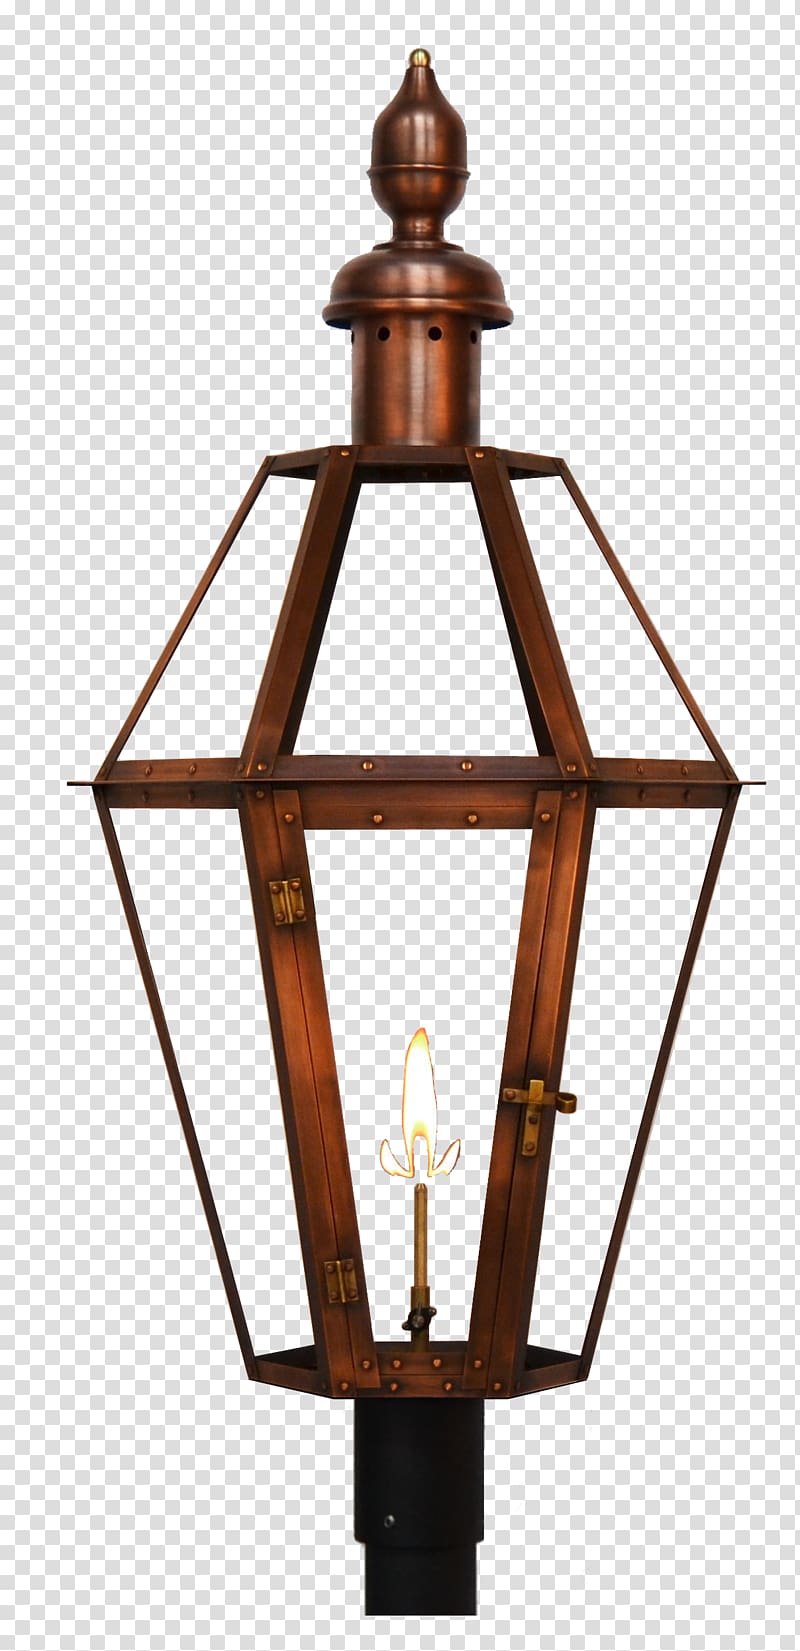 Gas lighting Lantern Coppersmith, kongming latern transparent background PNG clipart